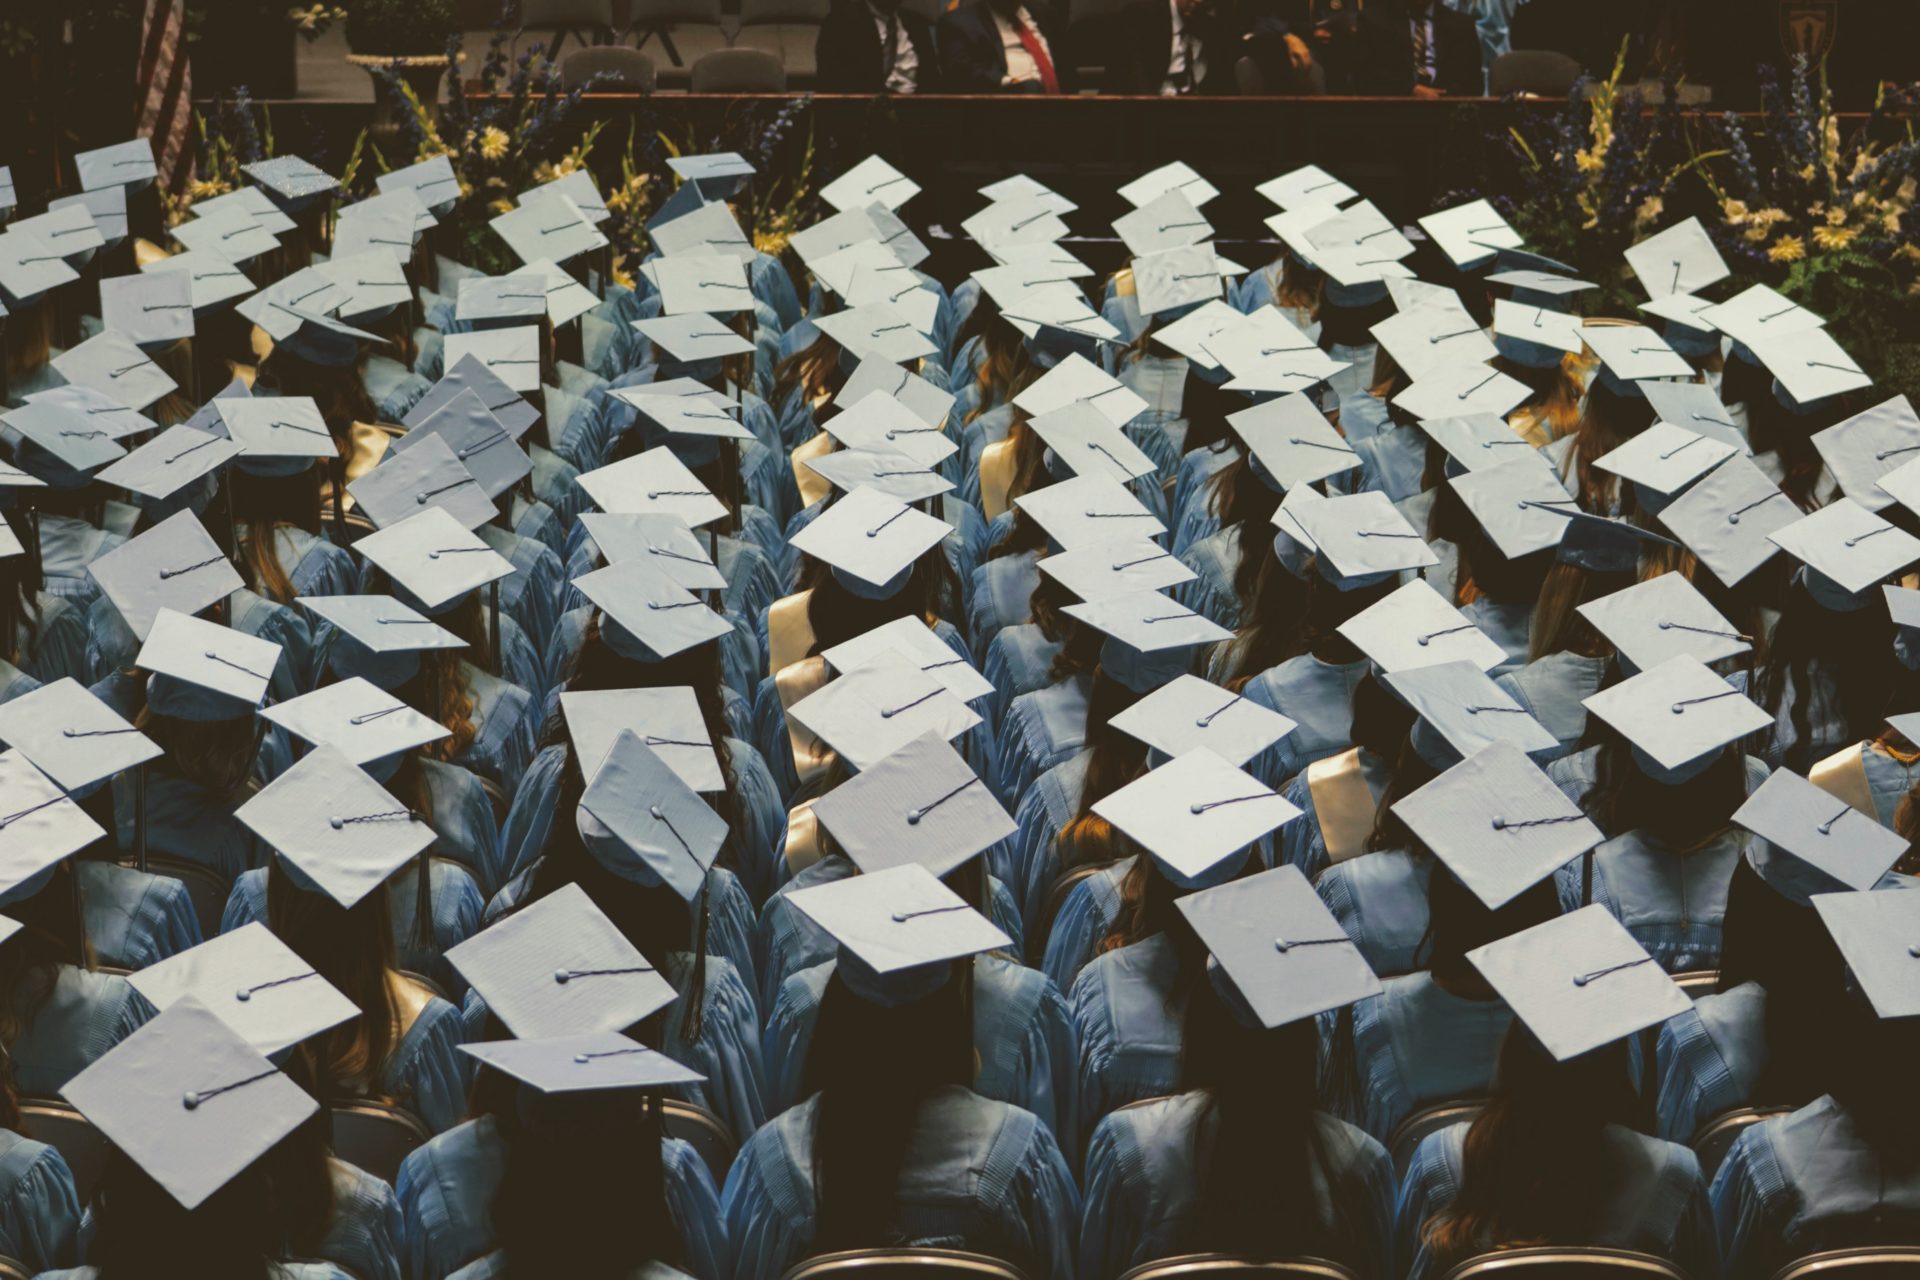 Students sit at a graduation ceremony wearing their caps and gowns